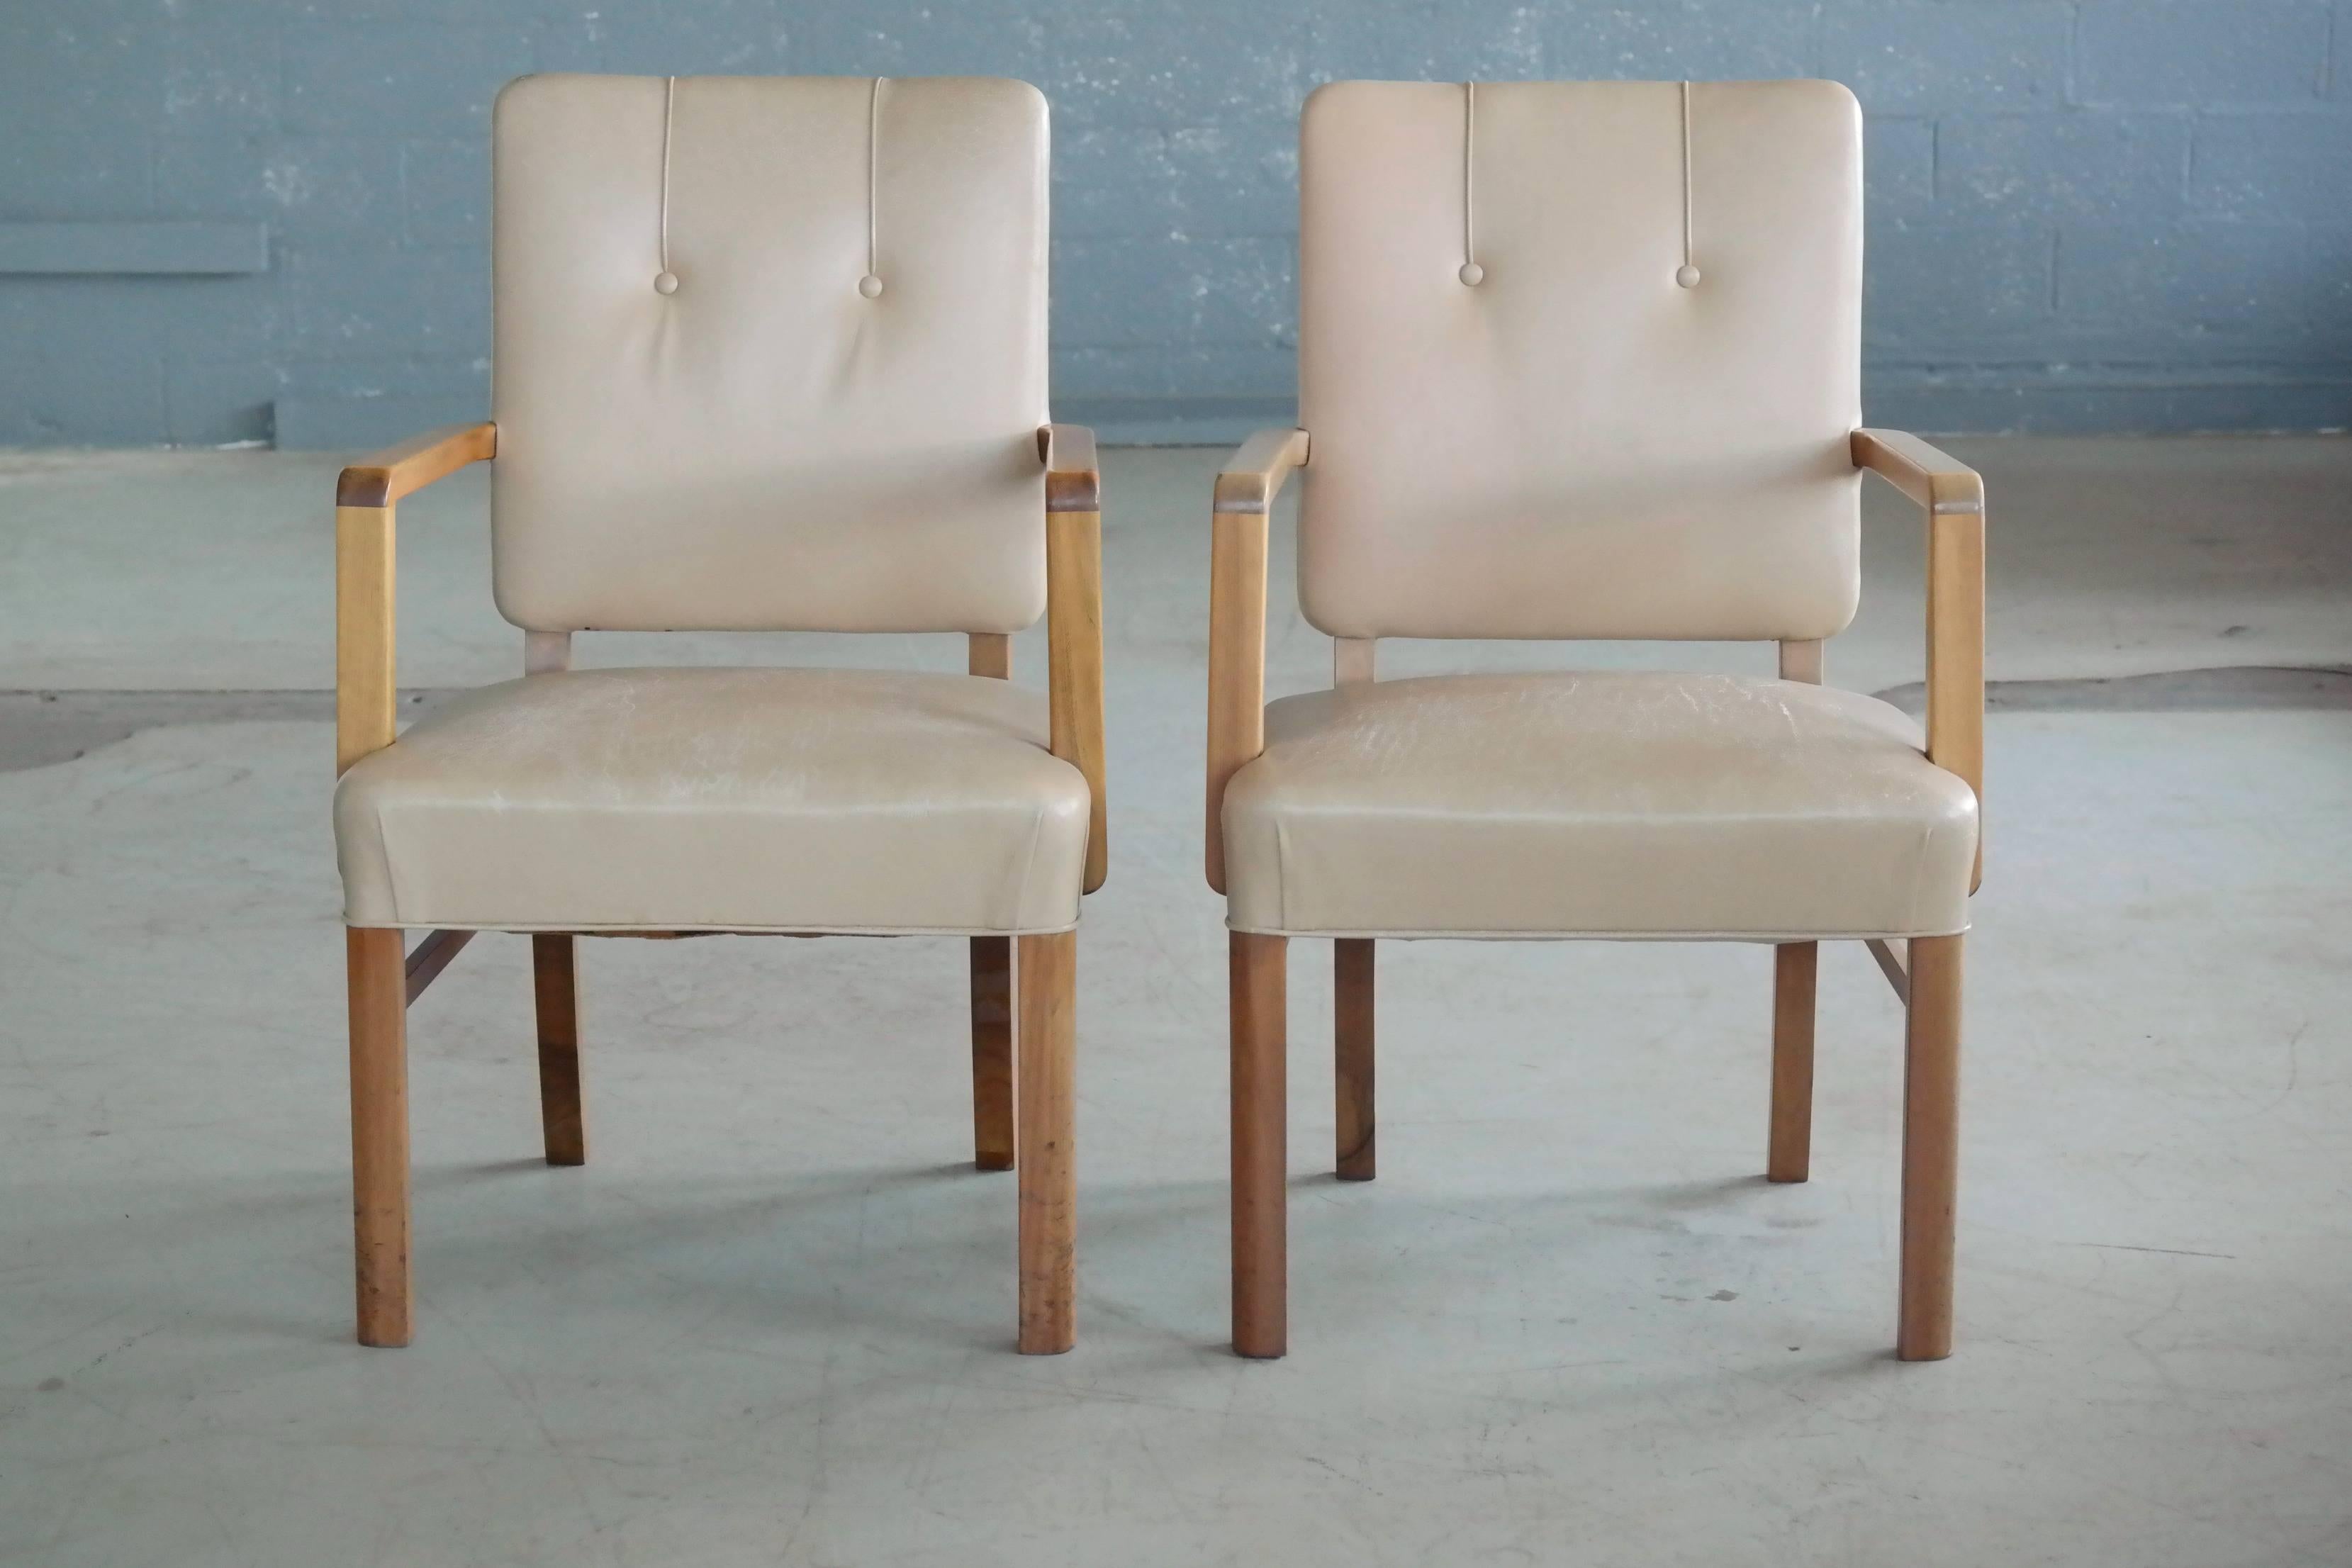 Mid-Century Modern Pair of Danish Midcentury Executive Desk or Side Chairs in Beige Leather